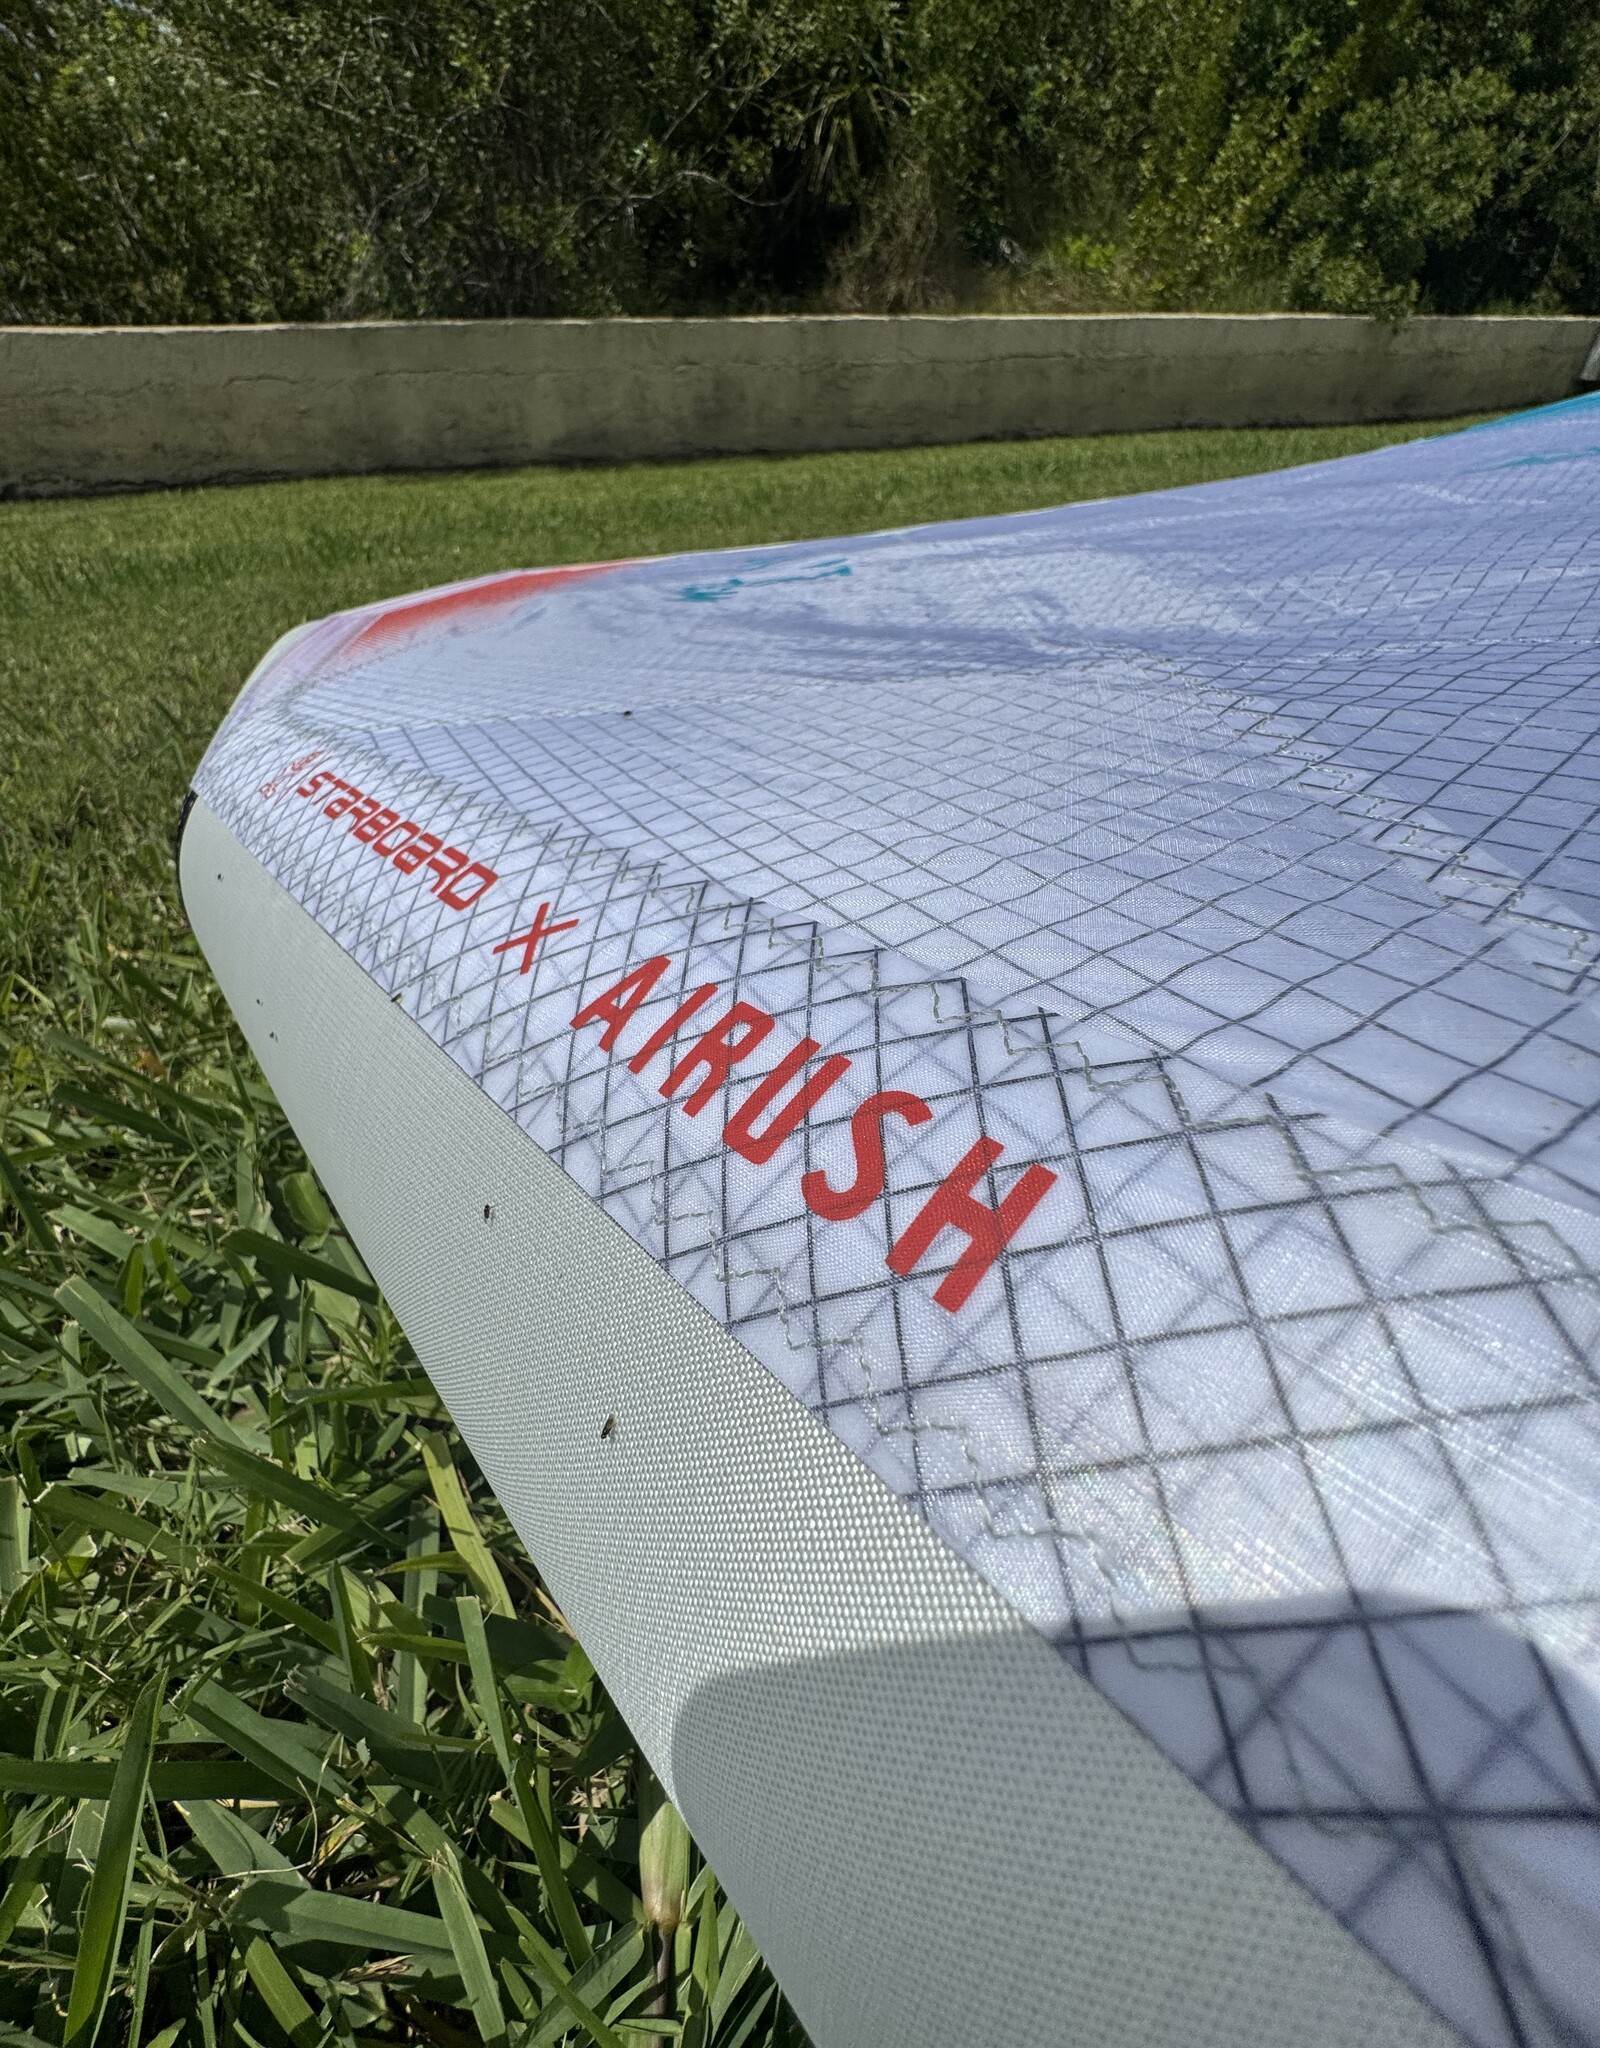 FREEWING FREEWING AIR TEAM 4M ULTRA X CANOPY AND HO'OKIPA AIRFRAME